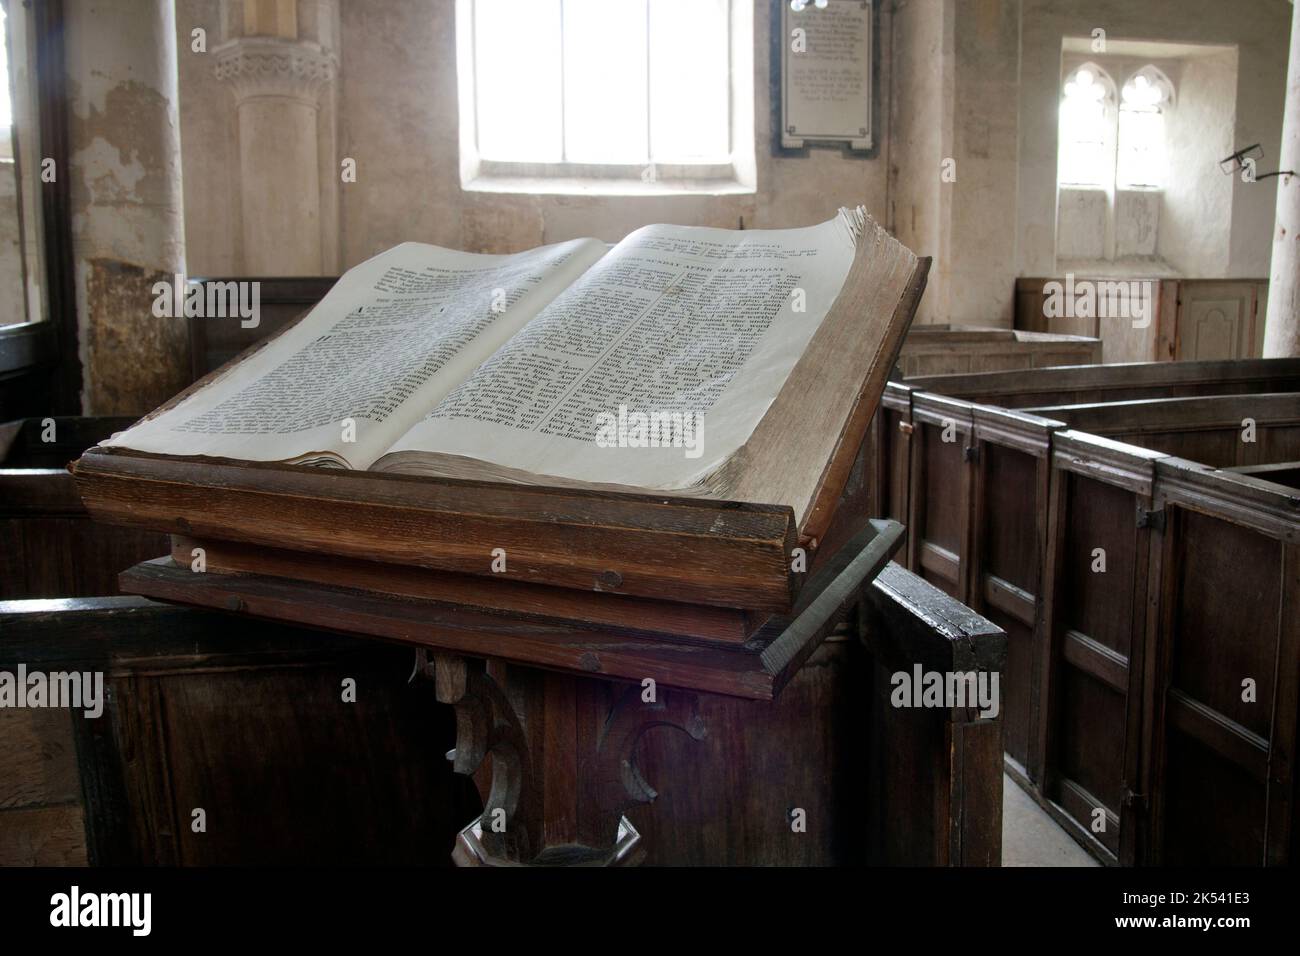 the old bible in St John the Baptist medieval church Inglesham, nr. Swindon, Wiltshire, England, with Anglo-Saxon origins Stock Photo